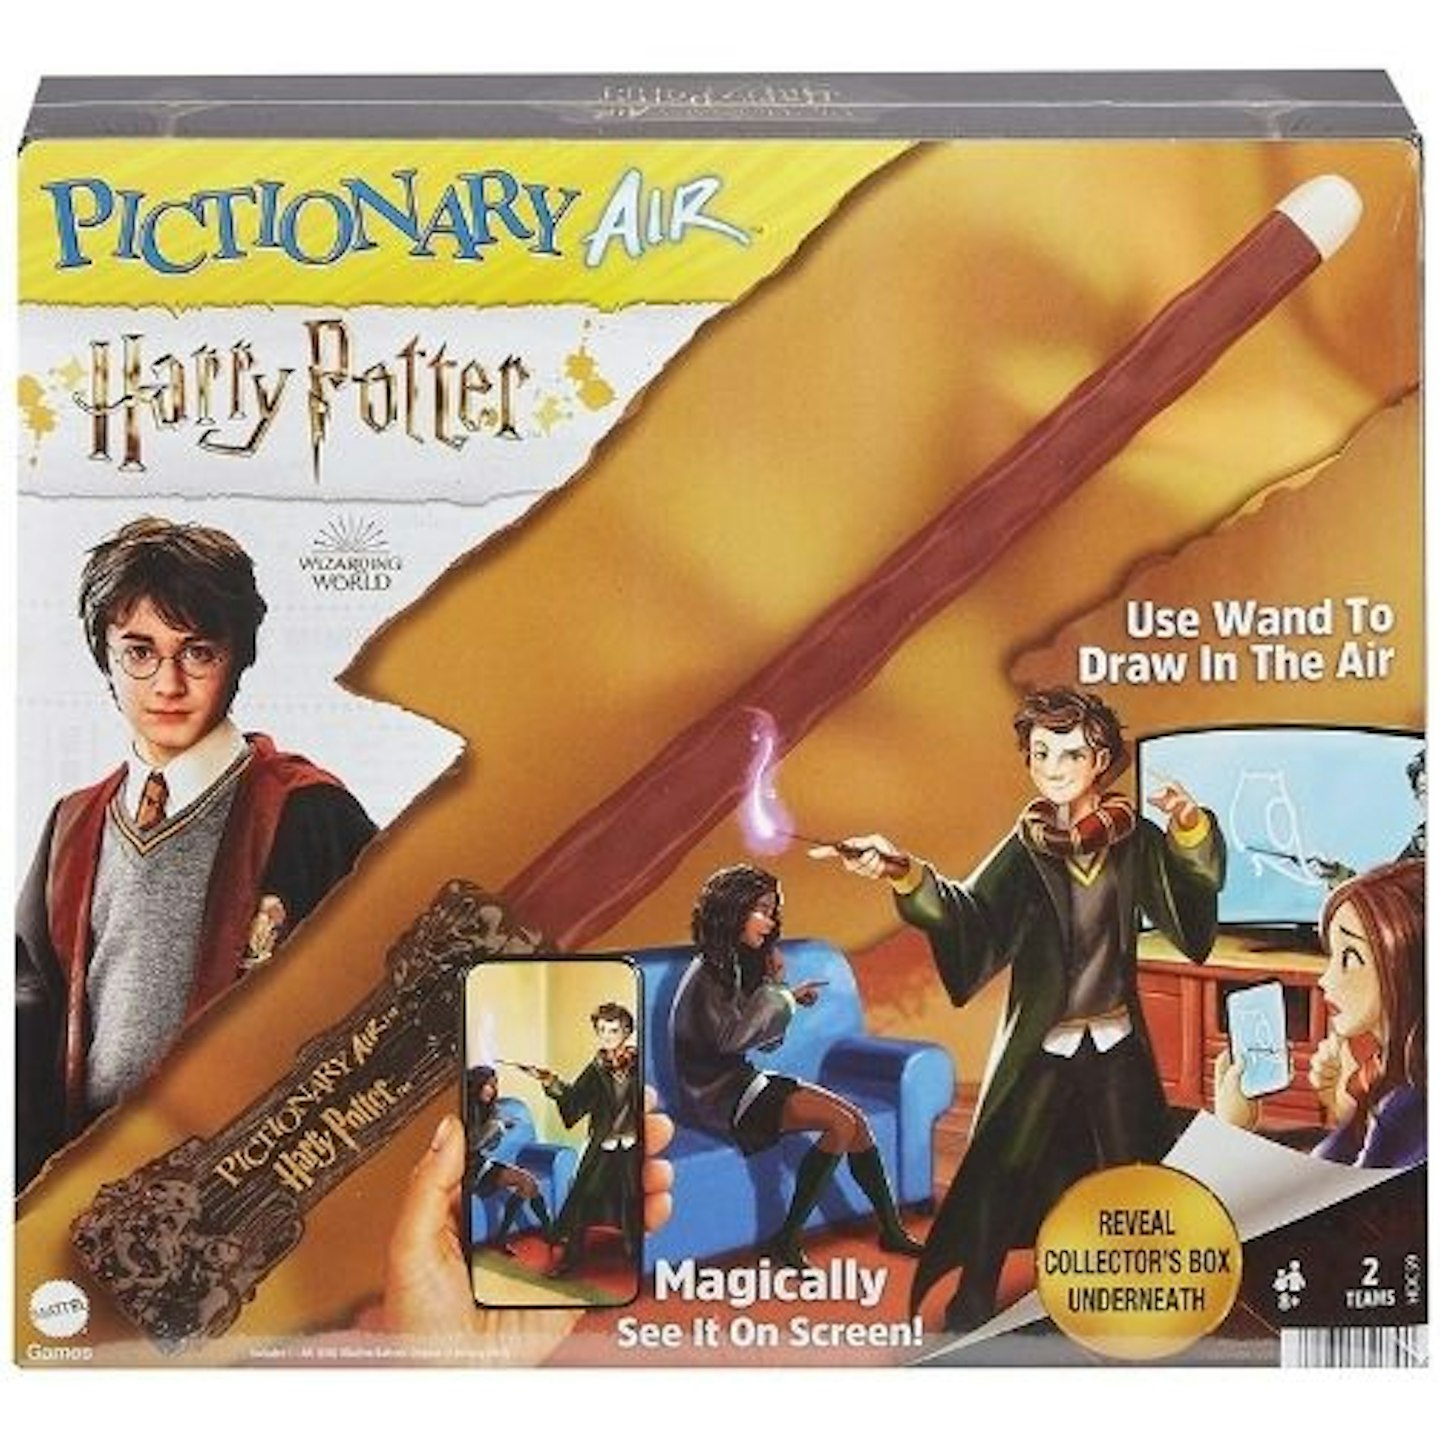 Harry Potter Pictionary Air 